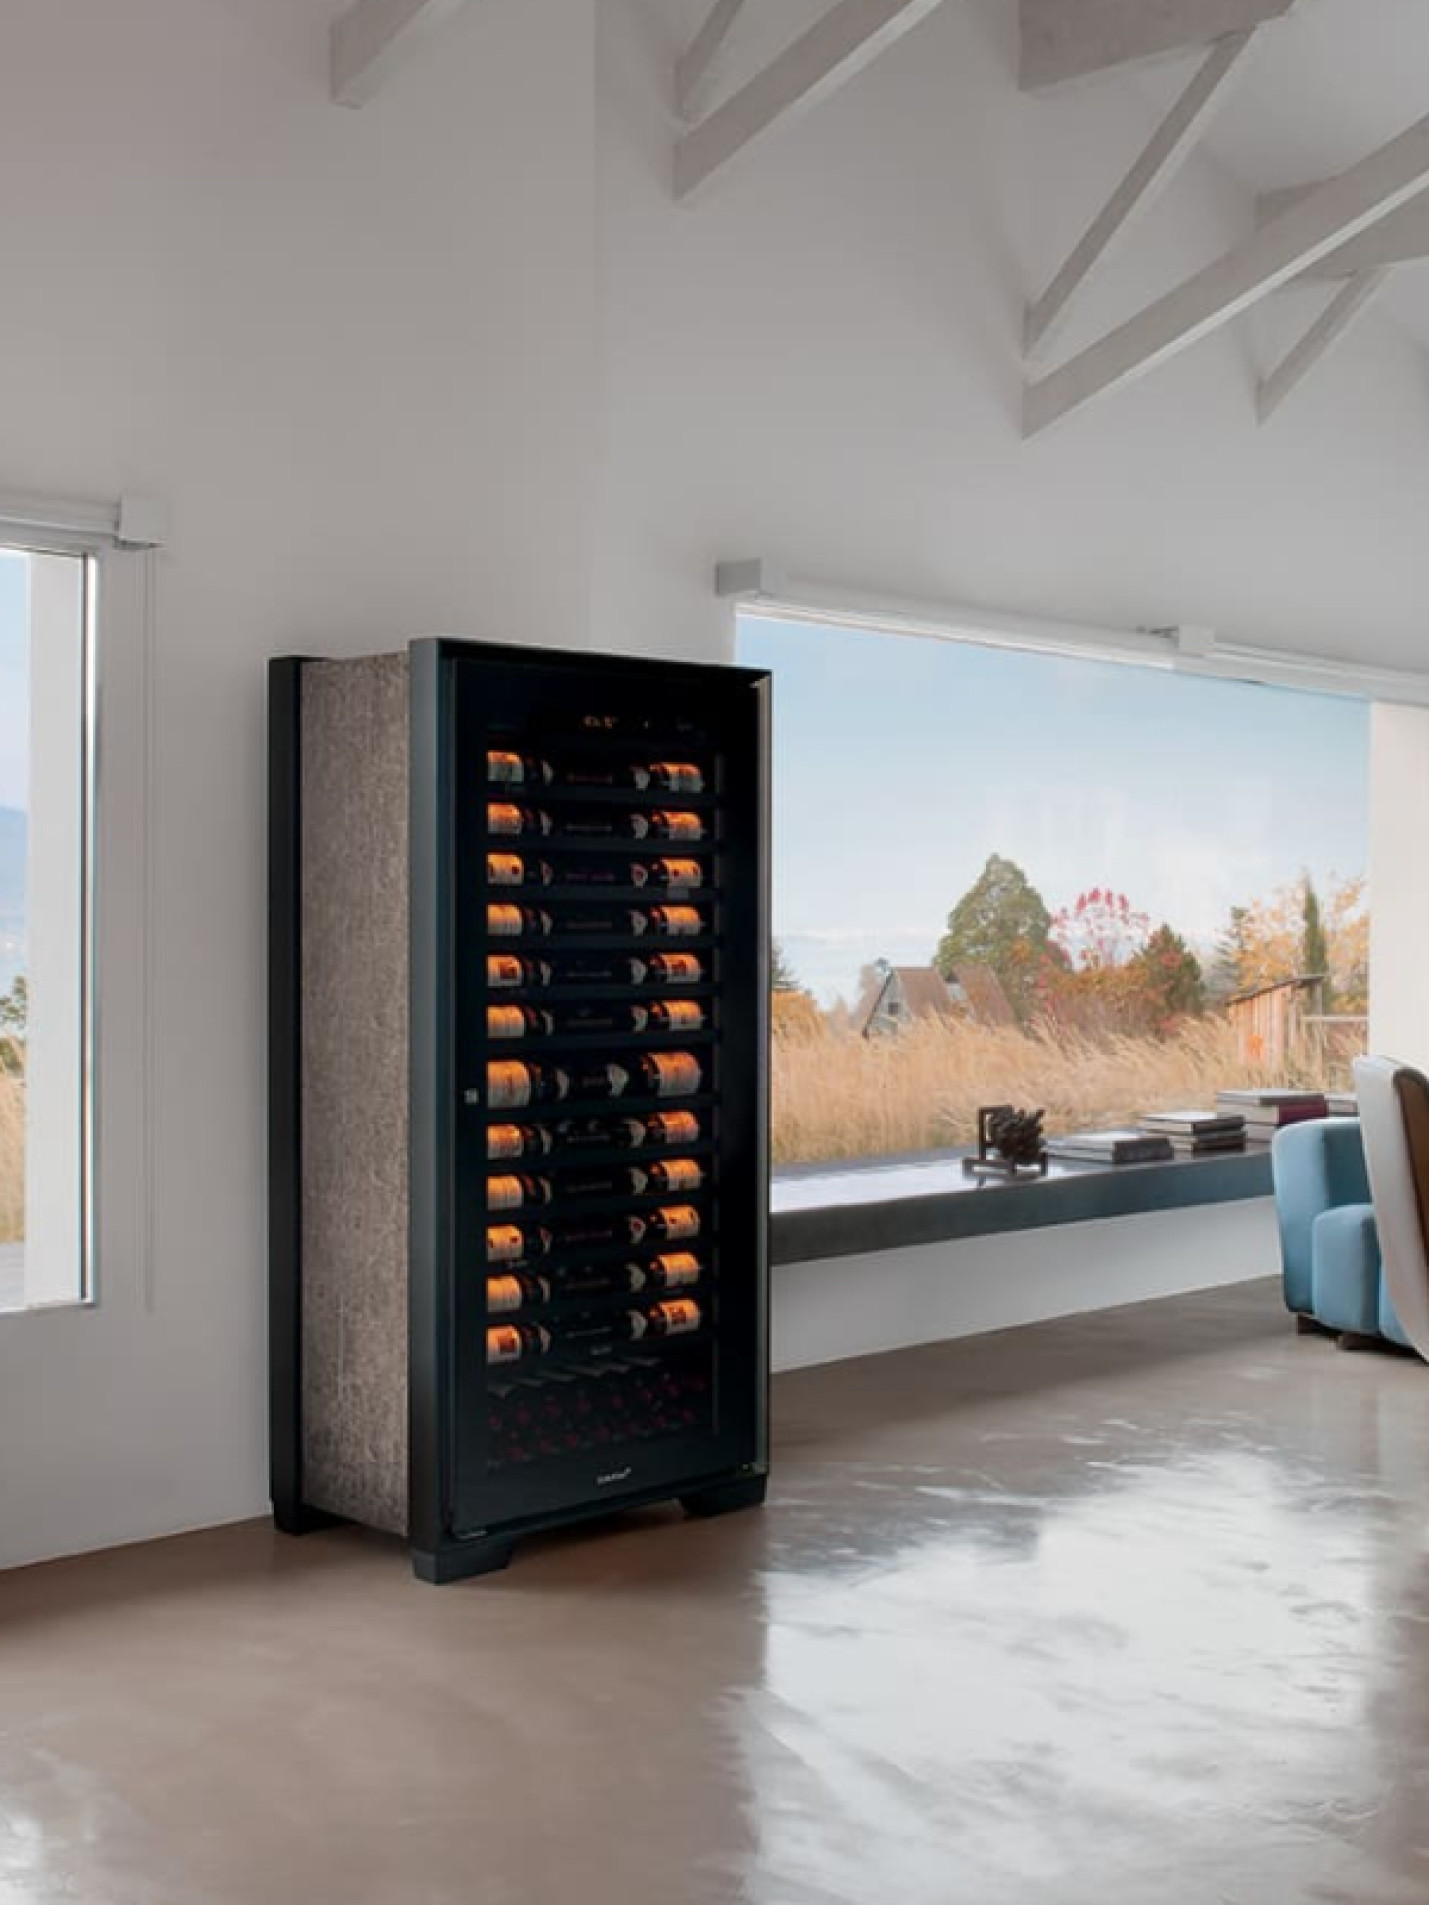 The luxurious Royale wine cellar in service mode to bring your best wines to tasting temperature.